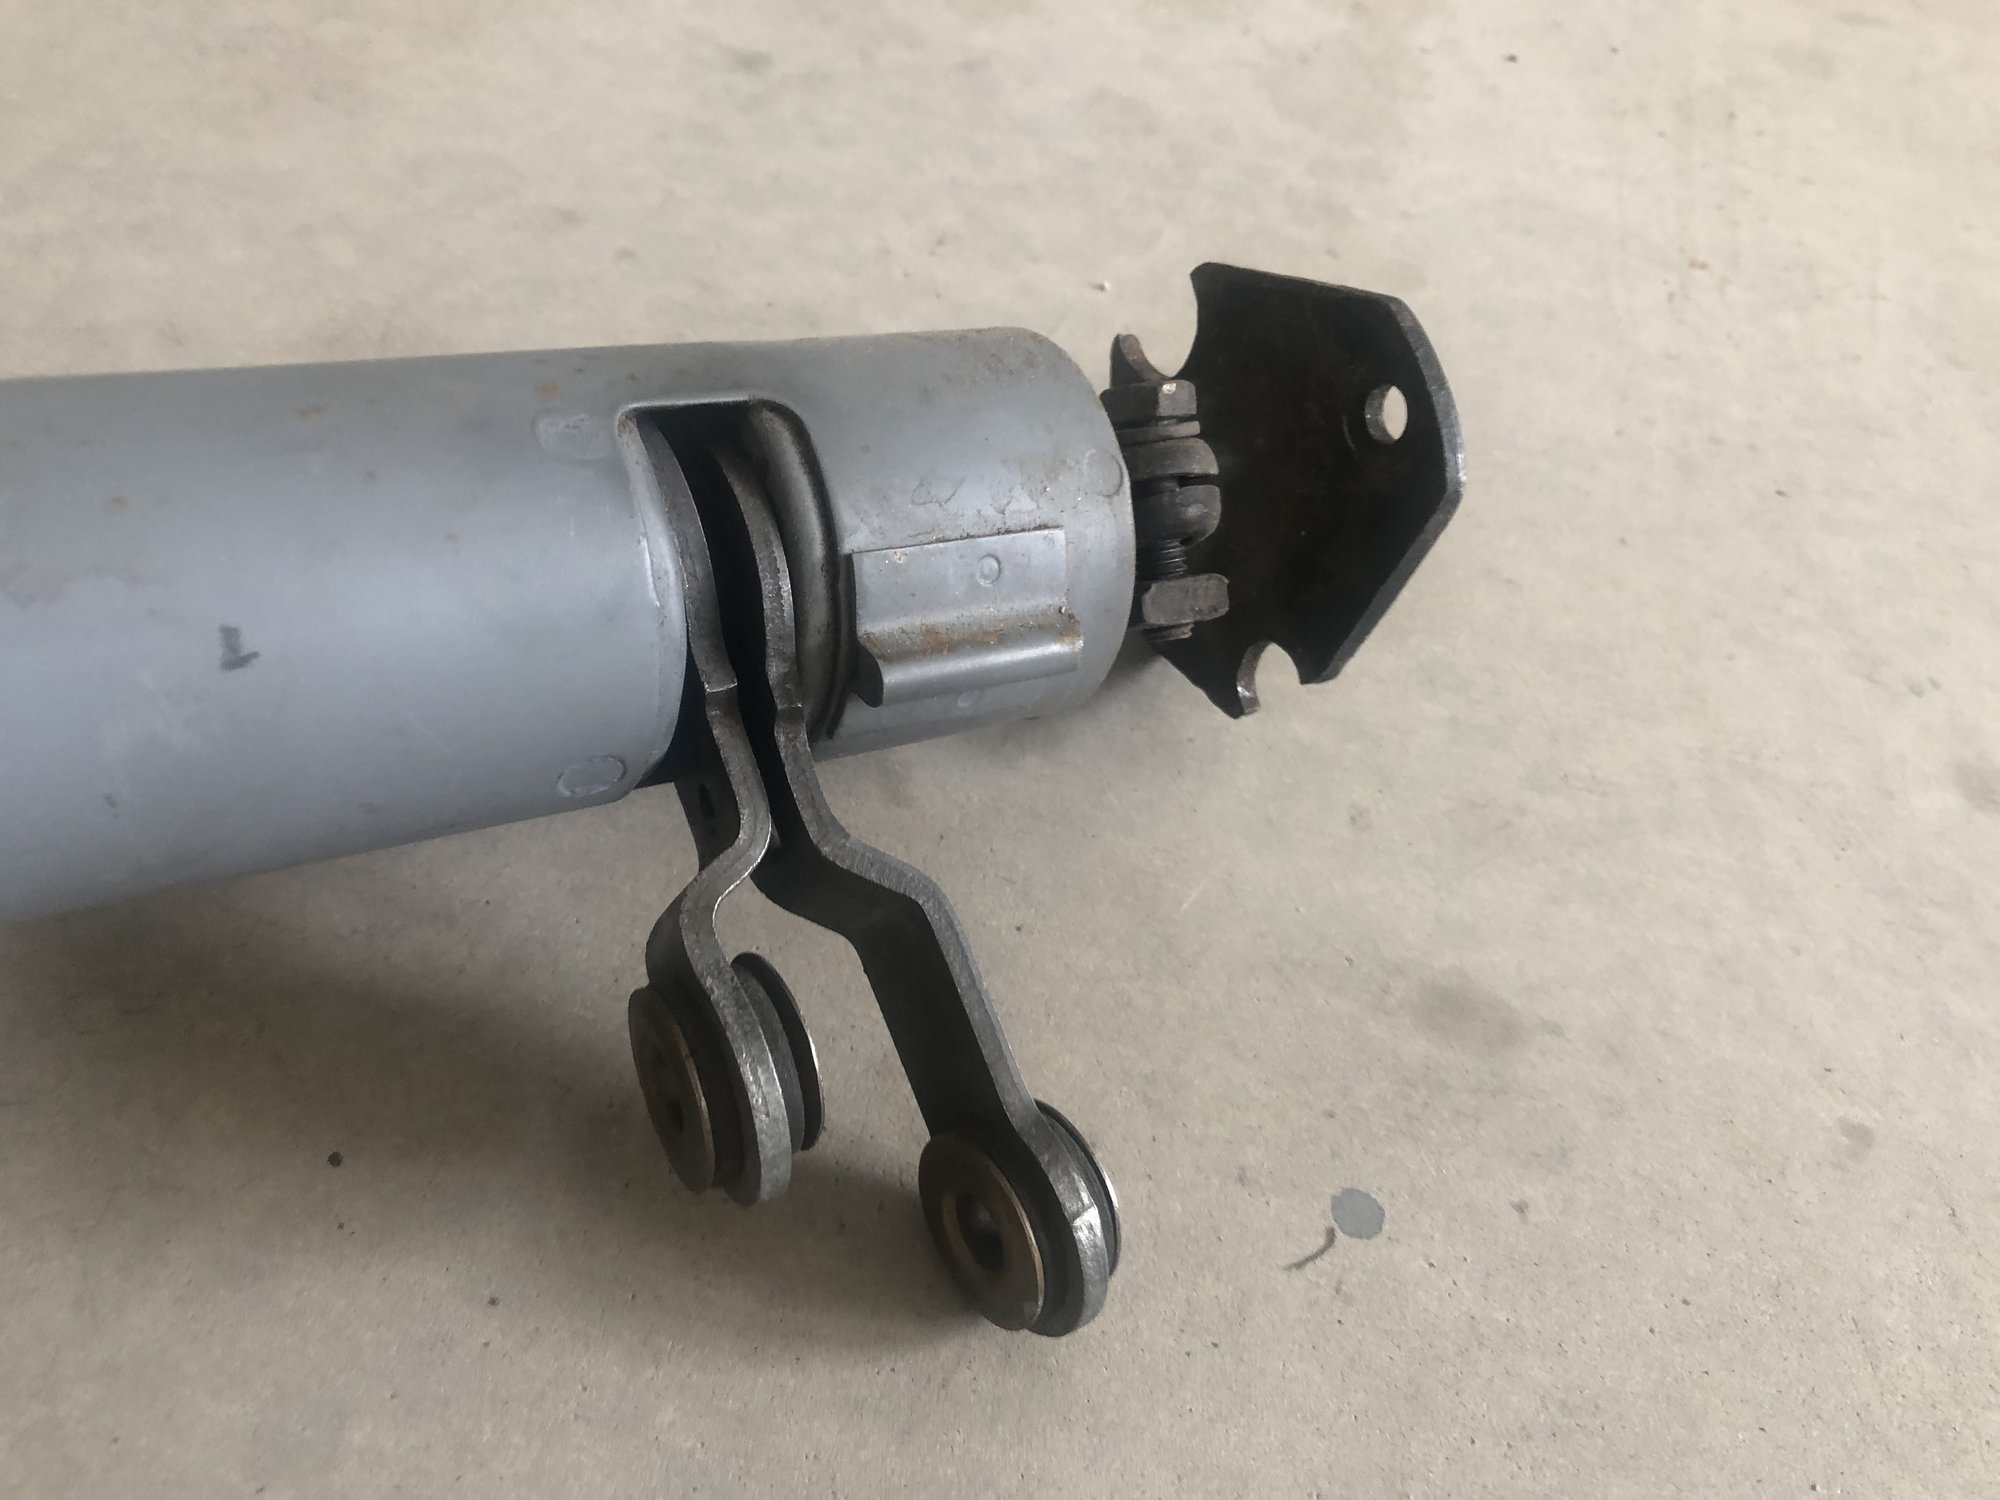 Steering/Suspension - 1966 F100 steering column and wheel - Used - 1966 Ford F-100 - Laveen, AZ 85339, United States